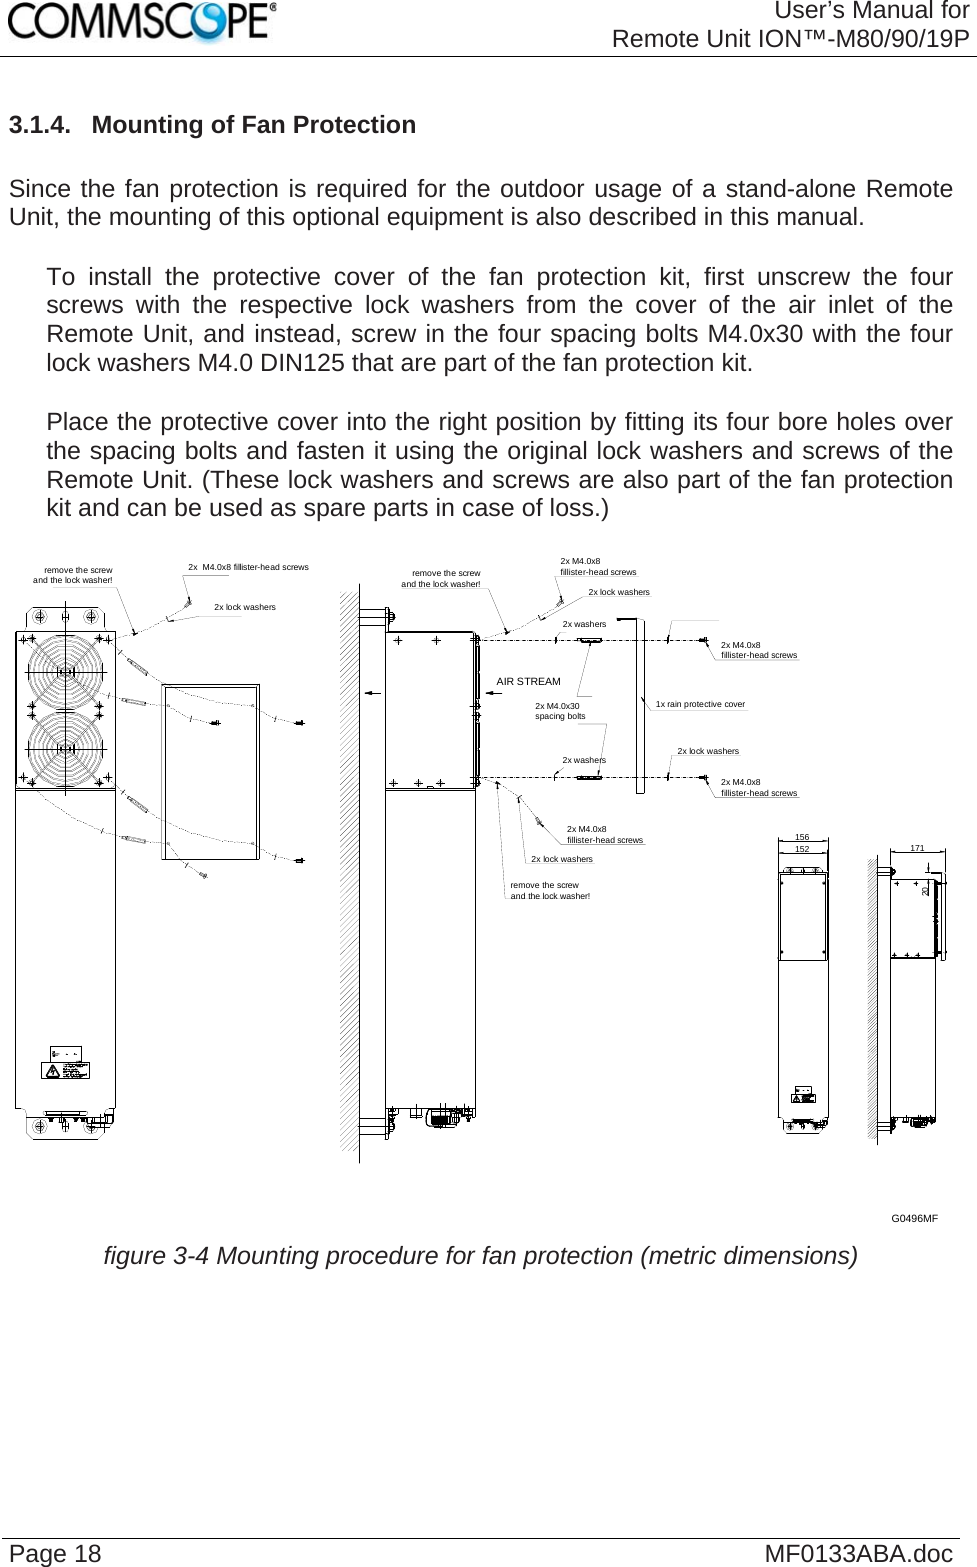 User’s Manual forRemote Unit ION™-M80/90/19P Page 18  MF0133ABA.doc3.1.4.  Mounting of Fan Protection  Since the fan protection is required for the outdoor usage of a stand-alone Remote Unit, the mounting of this optional equipment is also described in this manual.     To install the protective cover of the fan protection kit, first unscrew the four screws with the respective lock washers from the cover of the air inlet of the Remote Unit, and instead, screw in the four spacing bolts M4.0x30 with the four lock washers M4.0 DIN125 that are part of the fan protection kit.     Place the protective cover into the right position by fitting its four bore holes over the spacing bolts and fasten it using the original lock washers and screws of the Remote Unit. (These lock washers and screws are also part of the fan protection kit and can be used as spare parts in case of loss.)  2x M4.0x8fillister-head screws2x lock washersremove the screwand the lock washer!2x lock washers2x M4.0x8fillister-head screwsremove the screwand the lock washer!2x M4.0x8fillister-head screws1x rain protective cover2x lock washers2x M4.0x8fillister-head screws2x  M4.0x8 fillister-head screws2x lock washersremove the screwand the lock washer!2x washers2x washers156152 17120AIR STREAM2x M4.0x30spacing boltsG0496MF  figure 3-4 Mounting procedure for fan protection (metric dimensions)   